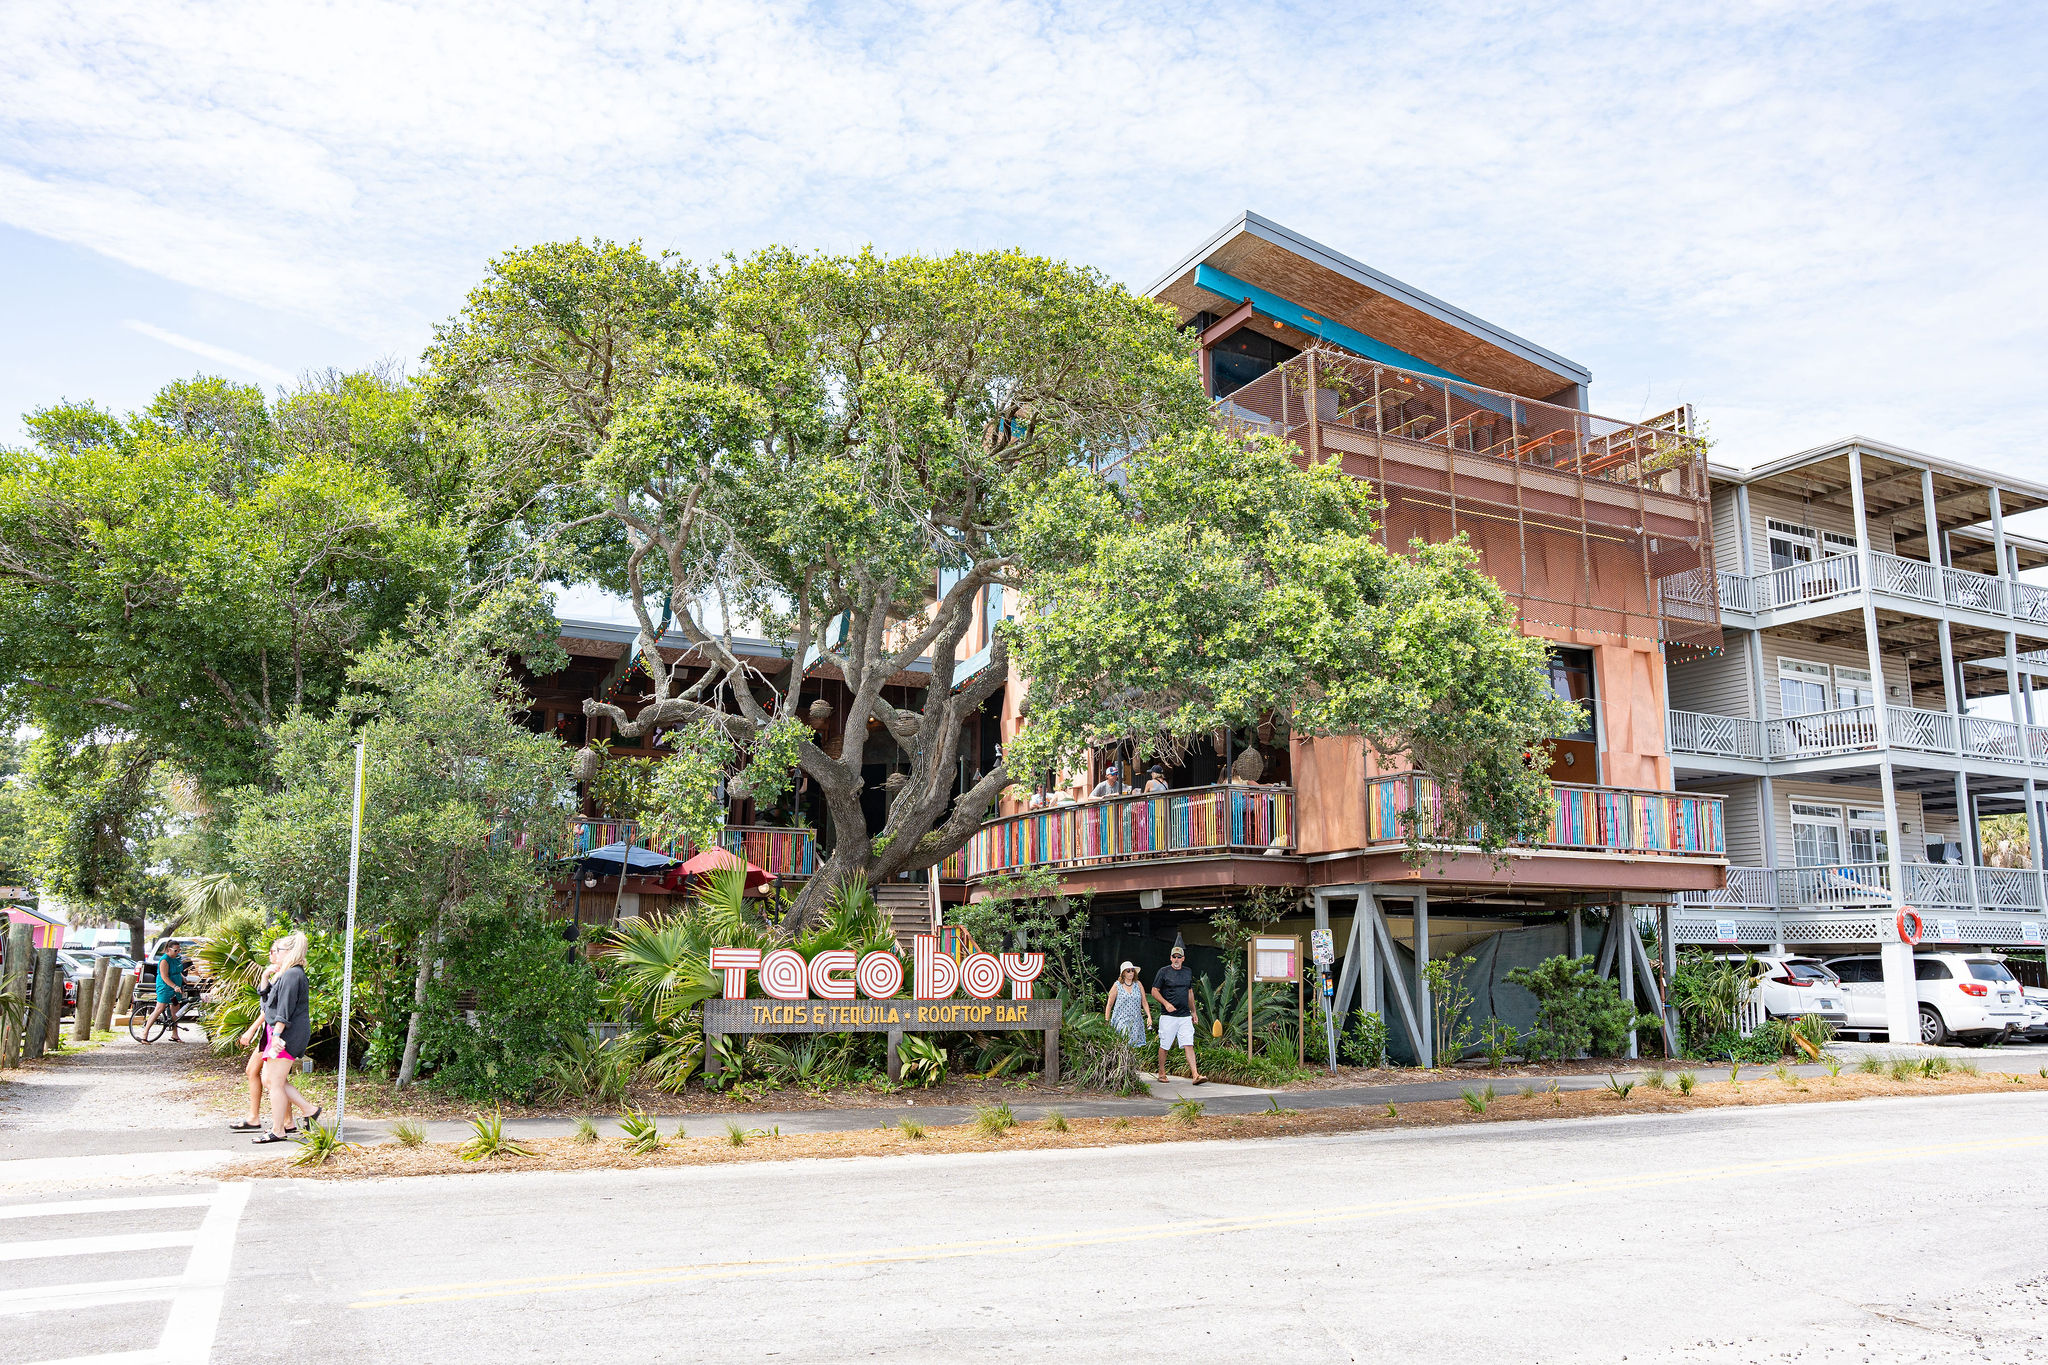 Exterior view of Taco Boy restaurant and rooftop bar on Folly Beach SC